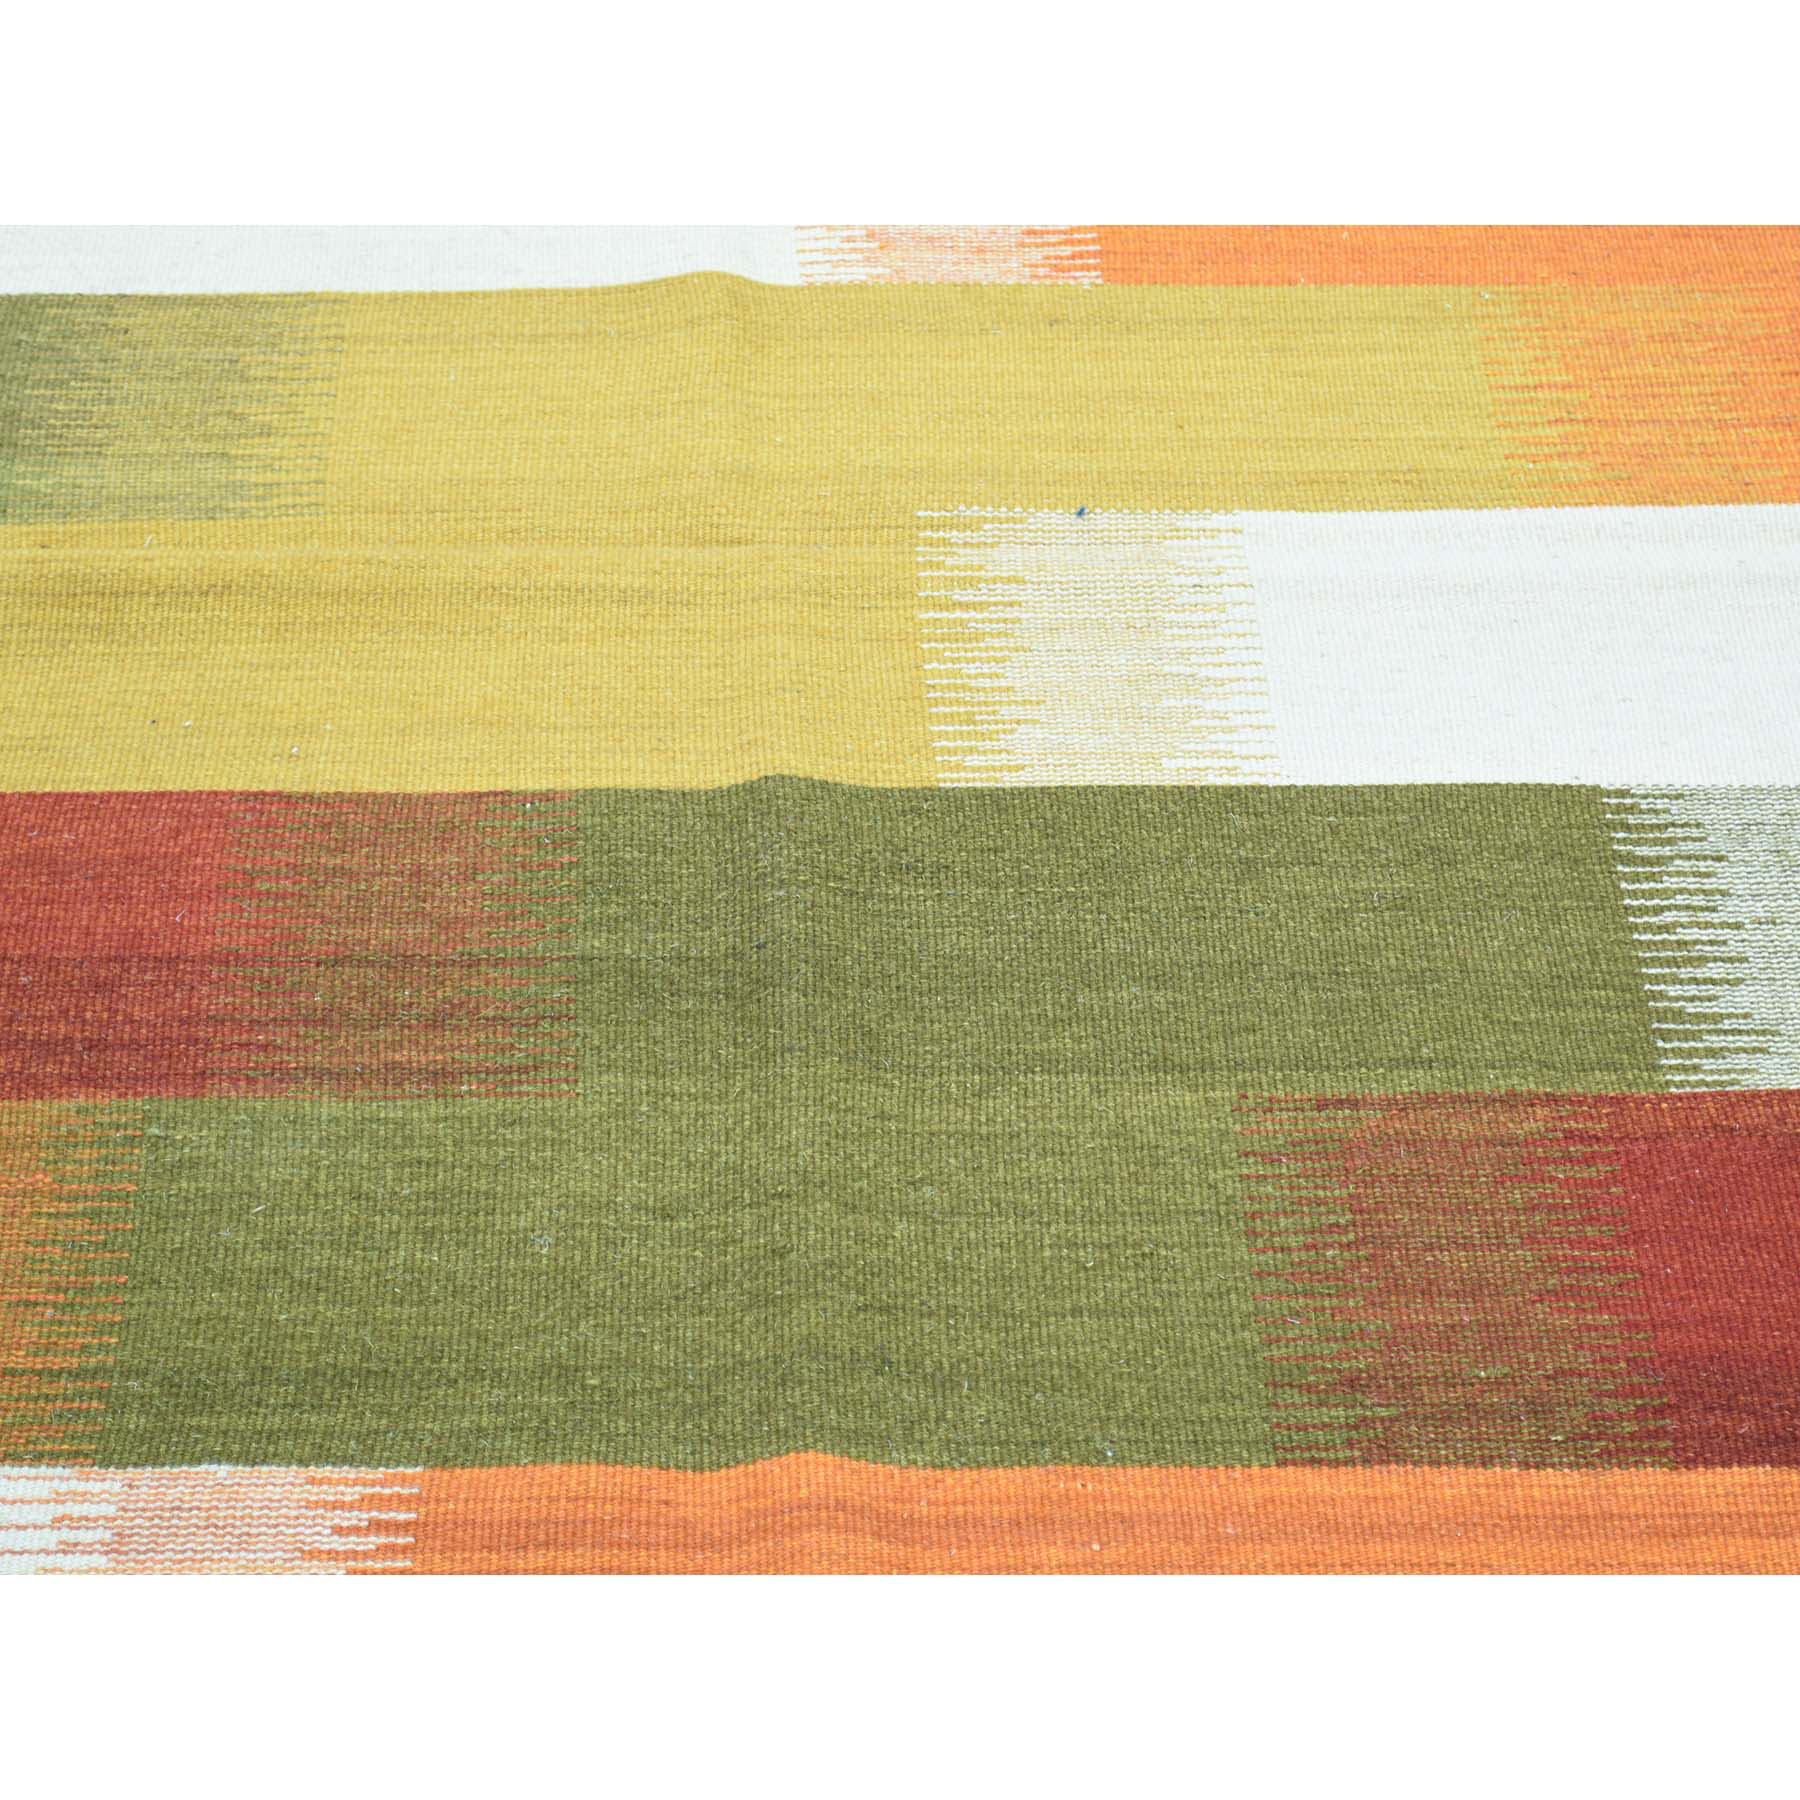 4-x6-2  Hand-Woven Durie Kilim 100 Percent Wool Flat Weave Colorful Rug 